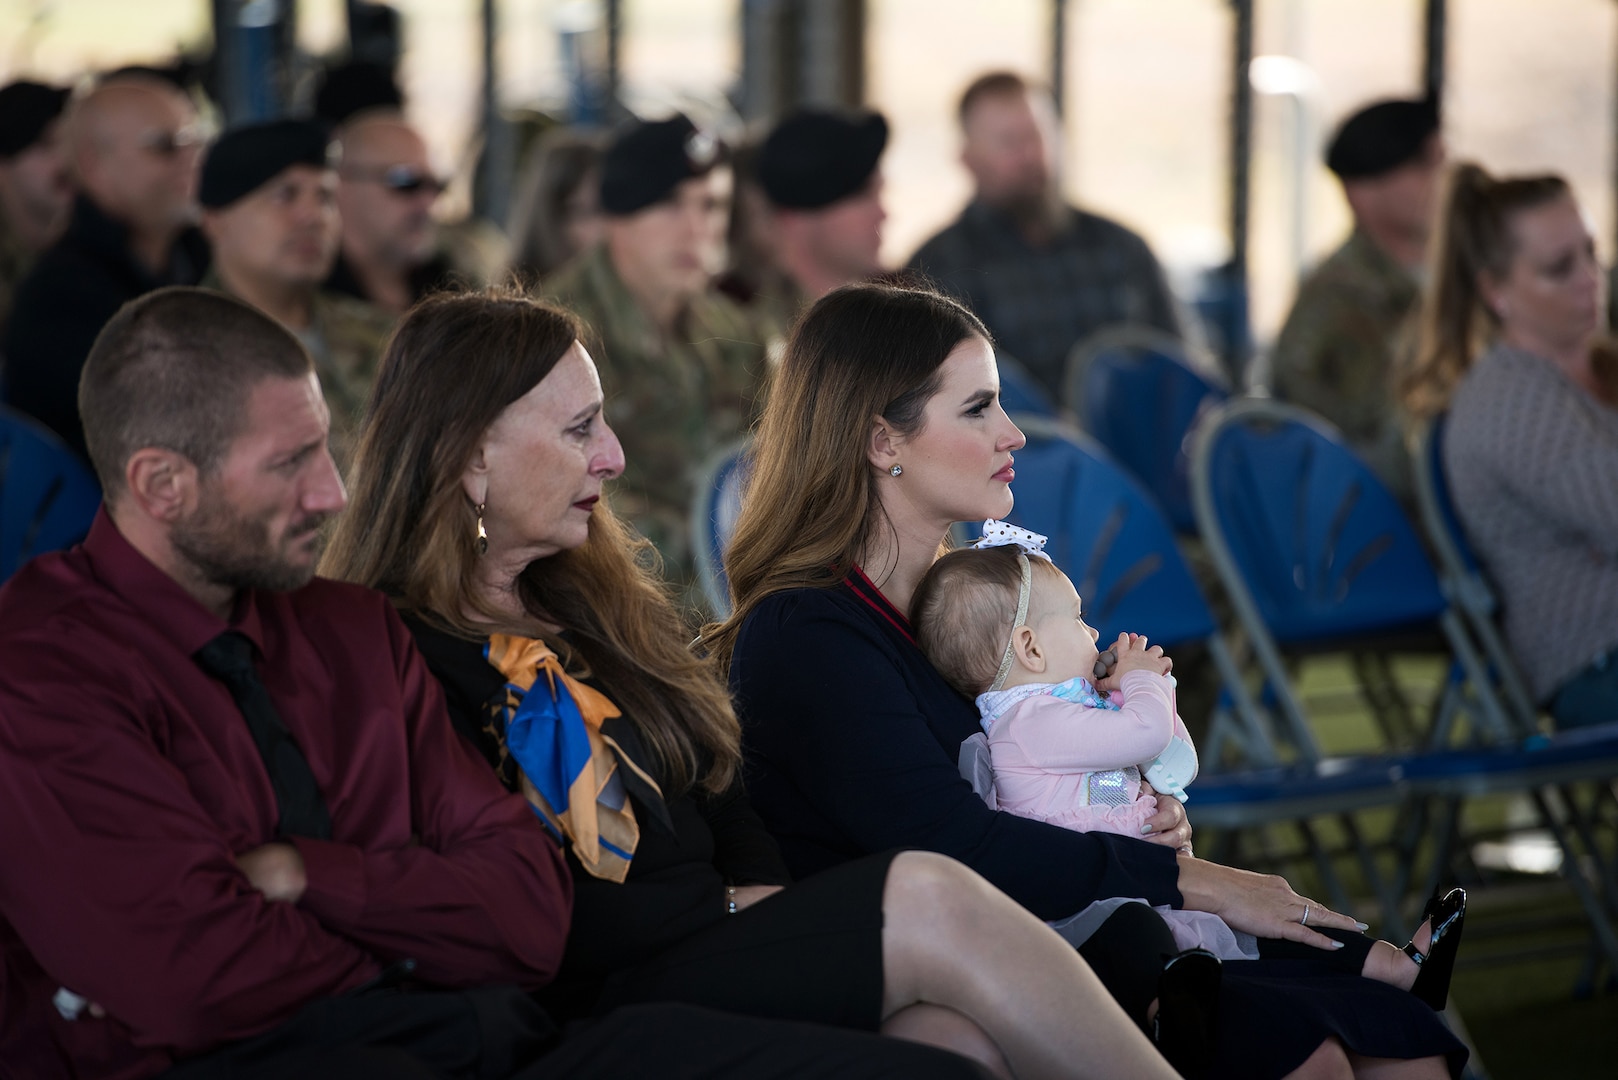 The family of U.S. Air Force Capt. Daniel Hill, incoming commander, listens as Capt. Hill speak to the audience during the activation and assumption of command ceremony of Detachment 2, Combat Training Squadron, Sept. 17, 2019, at Joint Base San Antonio-Medina Annex, Texas.